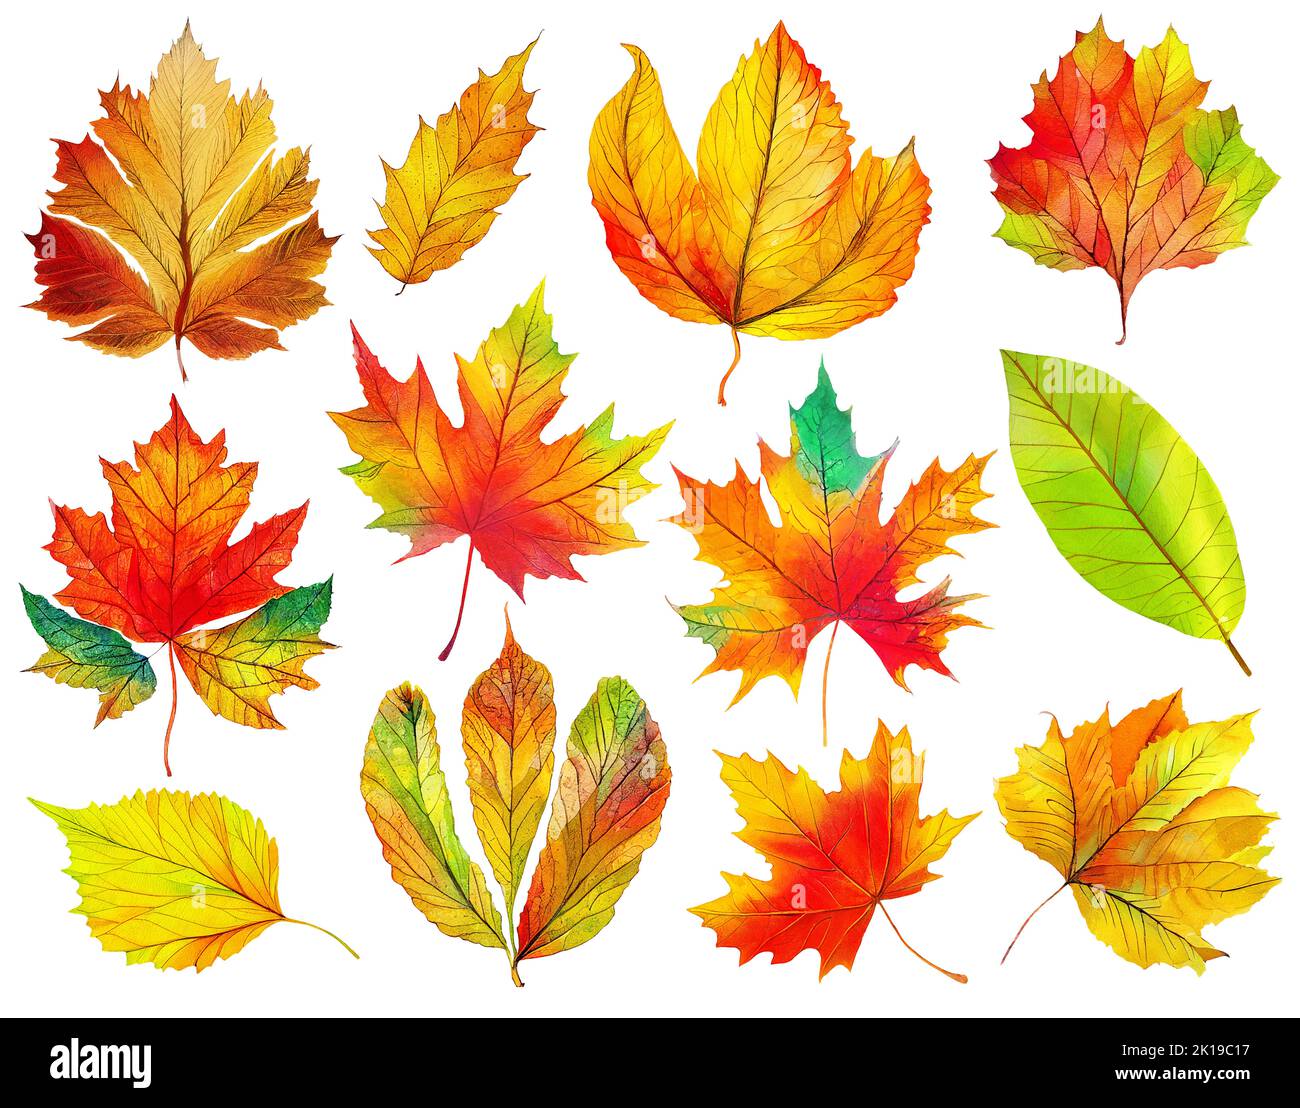 Twelve colorful autumn tree leaves isolated on white background. Digital illustration based on render by neural network Stock Photo